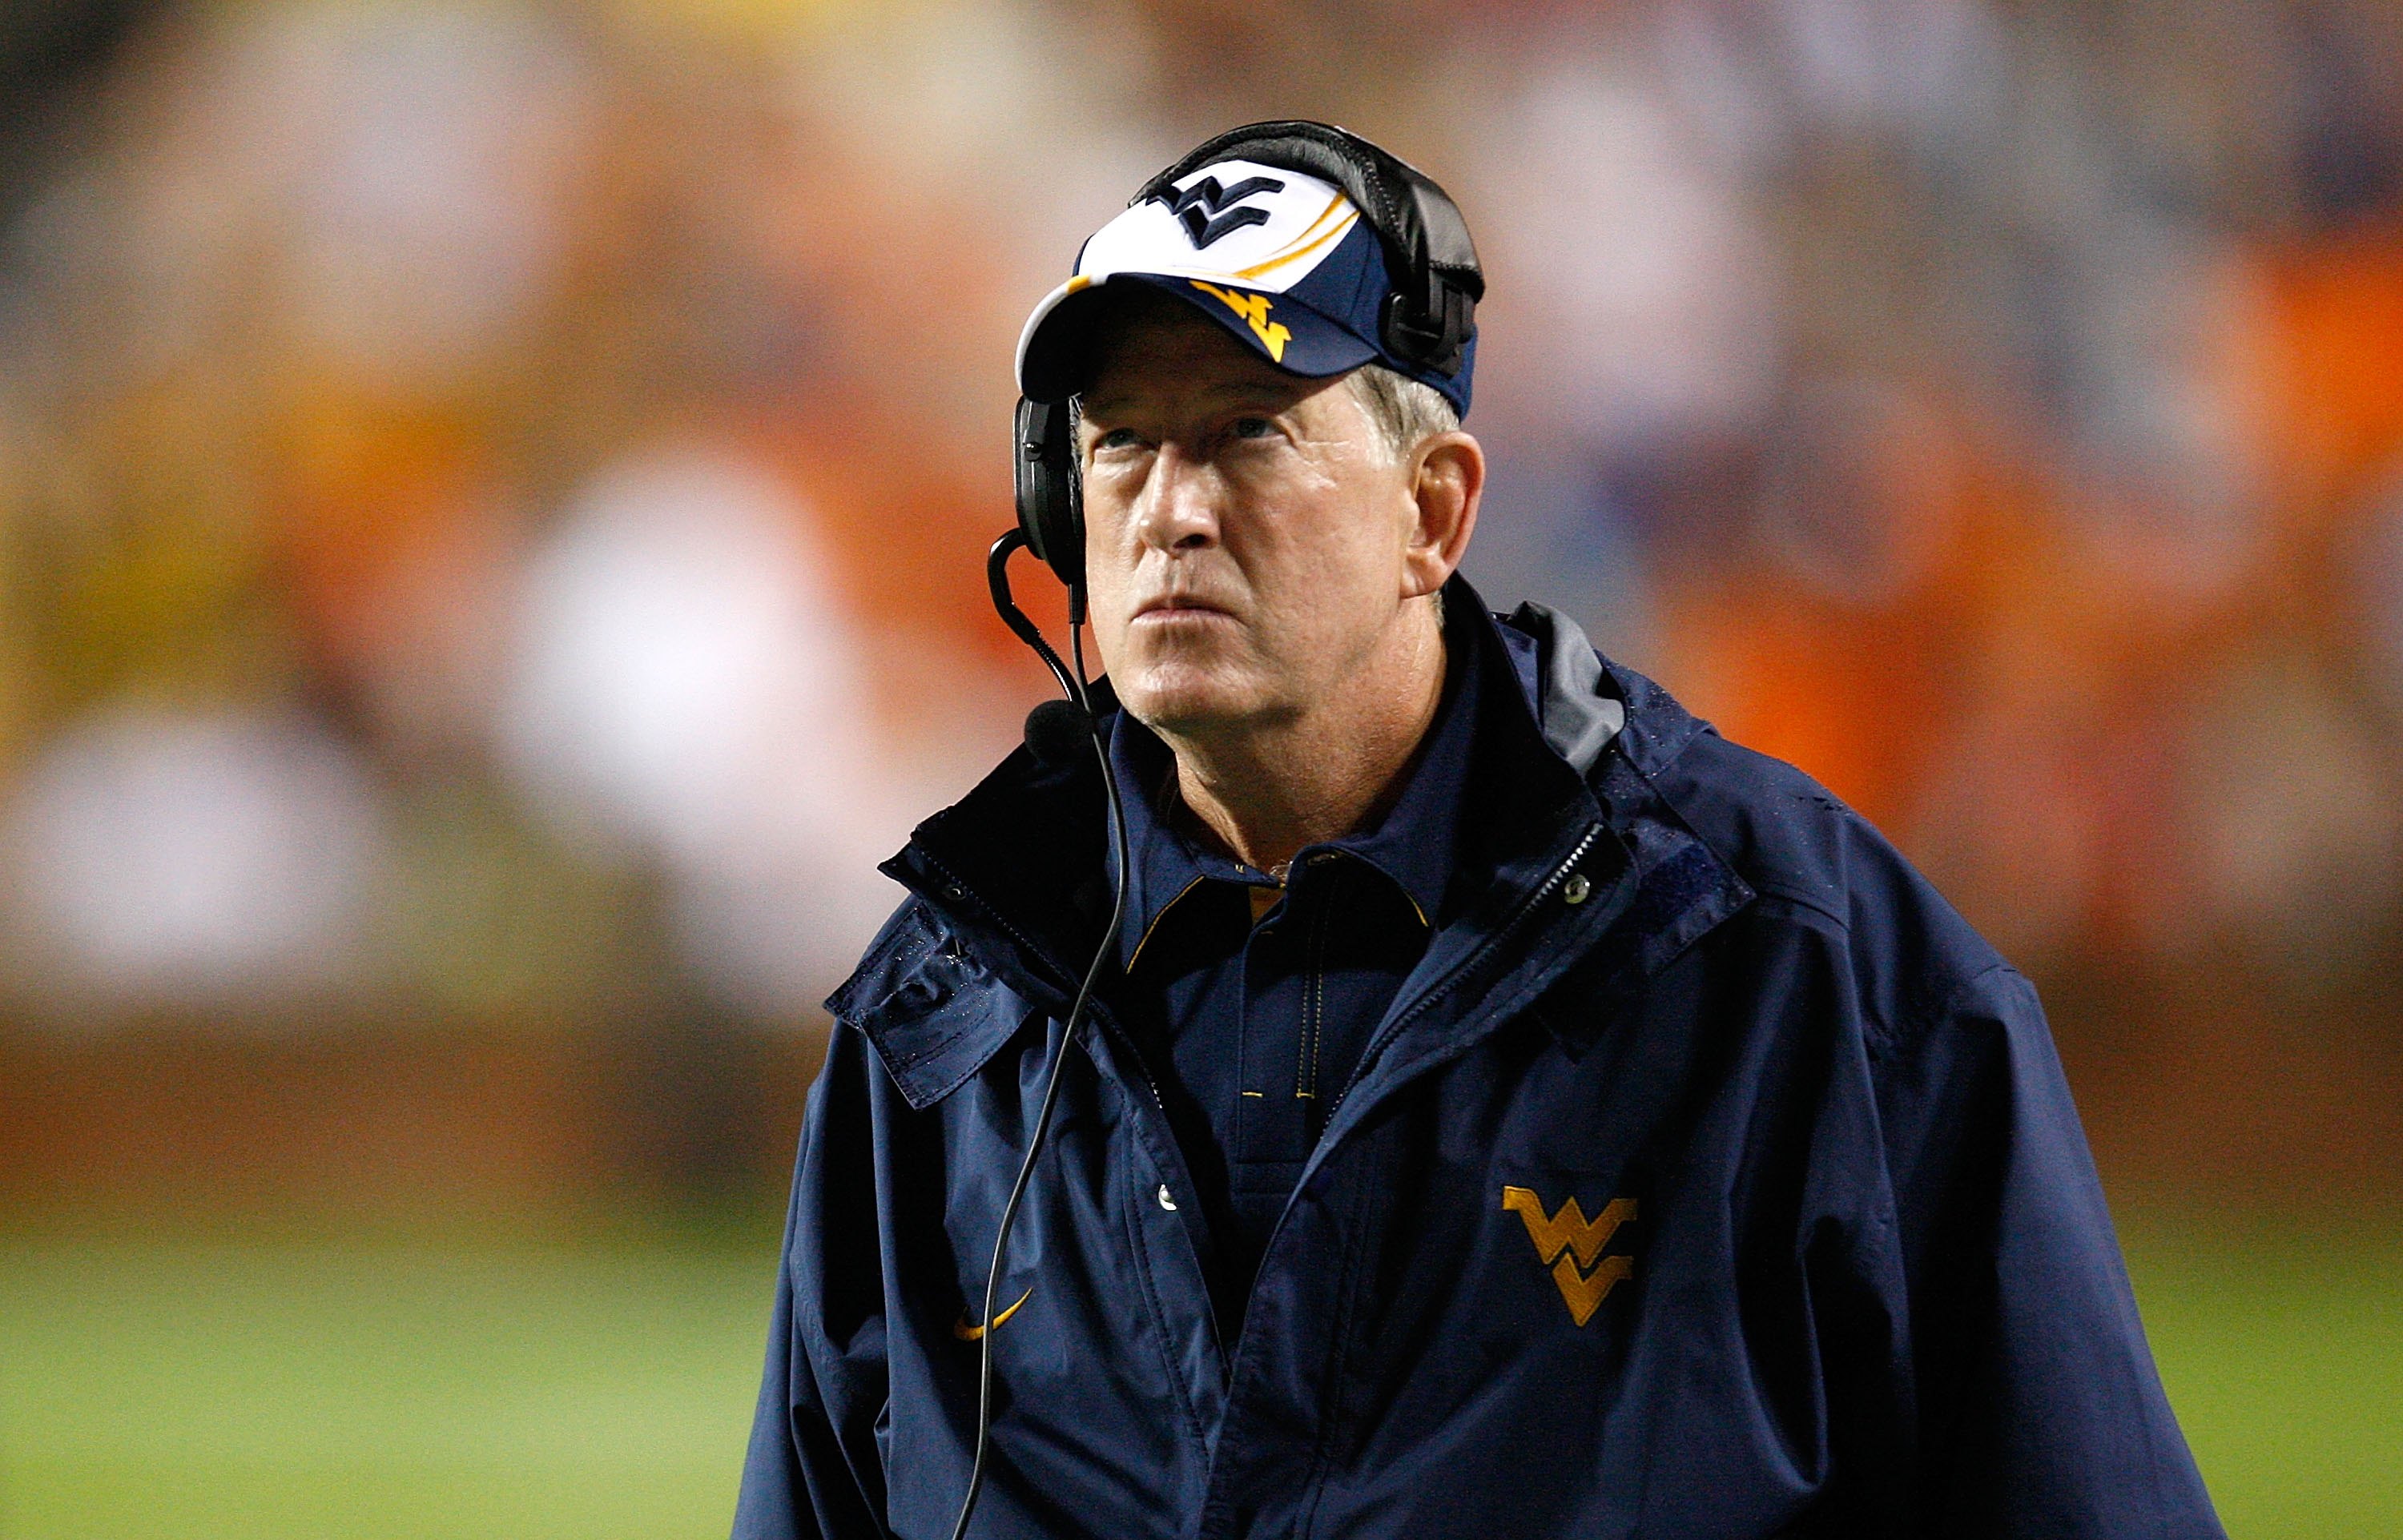 AUBURN, AL - SEPTEMBER 19:  Head coach Bill Stewart of the West Virginia Mountaineers against the Auburn Tigers at Jordan-Hare Stadium on September 19, 2009 in Auburn, Alabama.  (Photo by Kevin C. Cox/Getty Images)